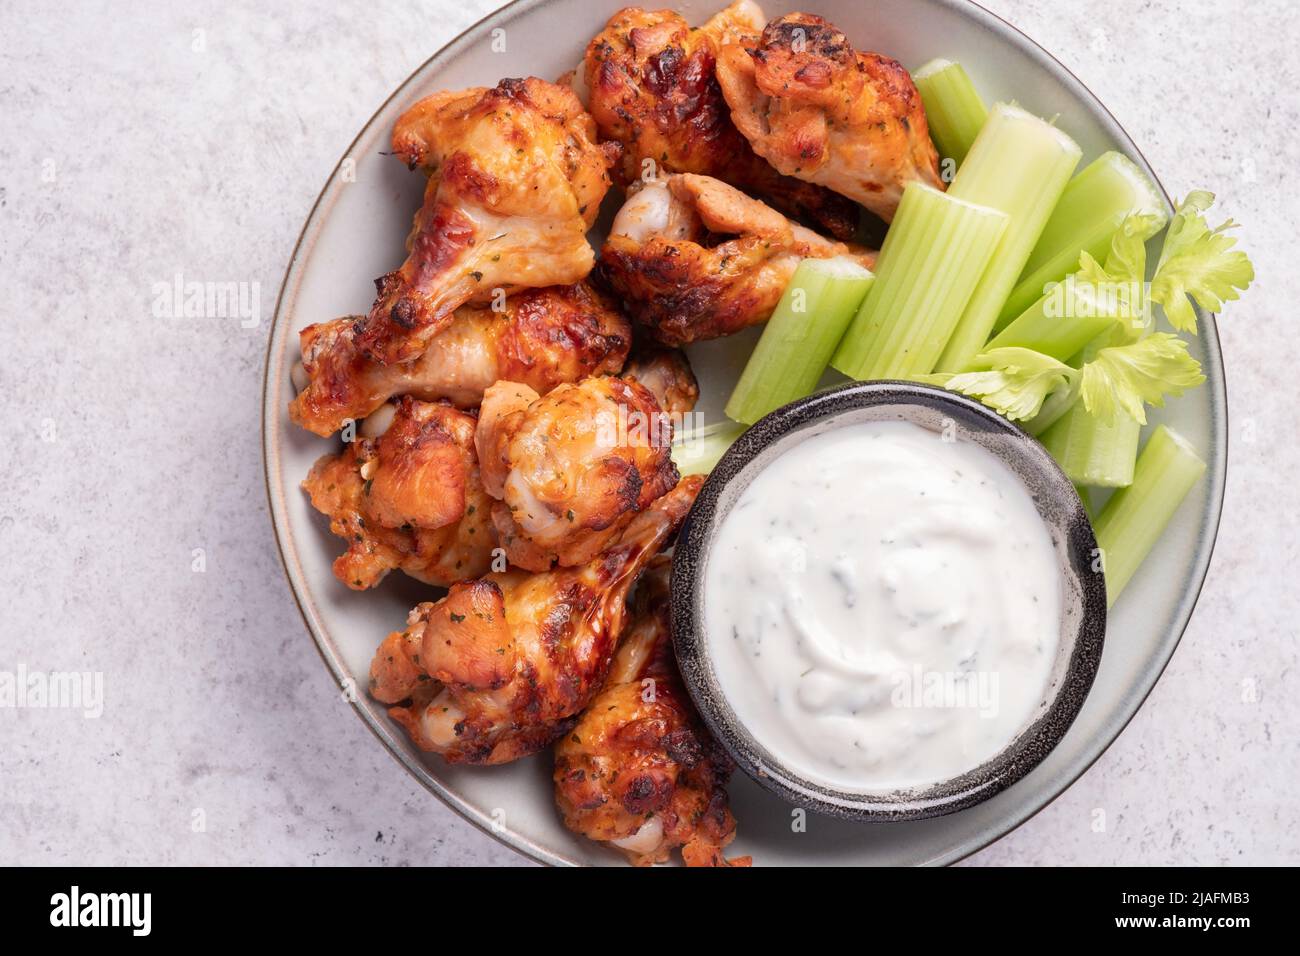 buffalo chicken wings with celery and ranch sauce Stock Photo